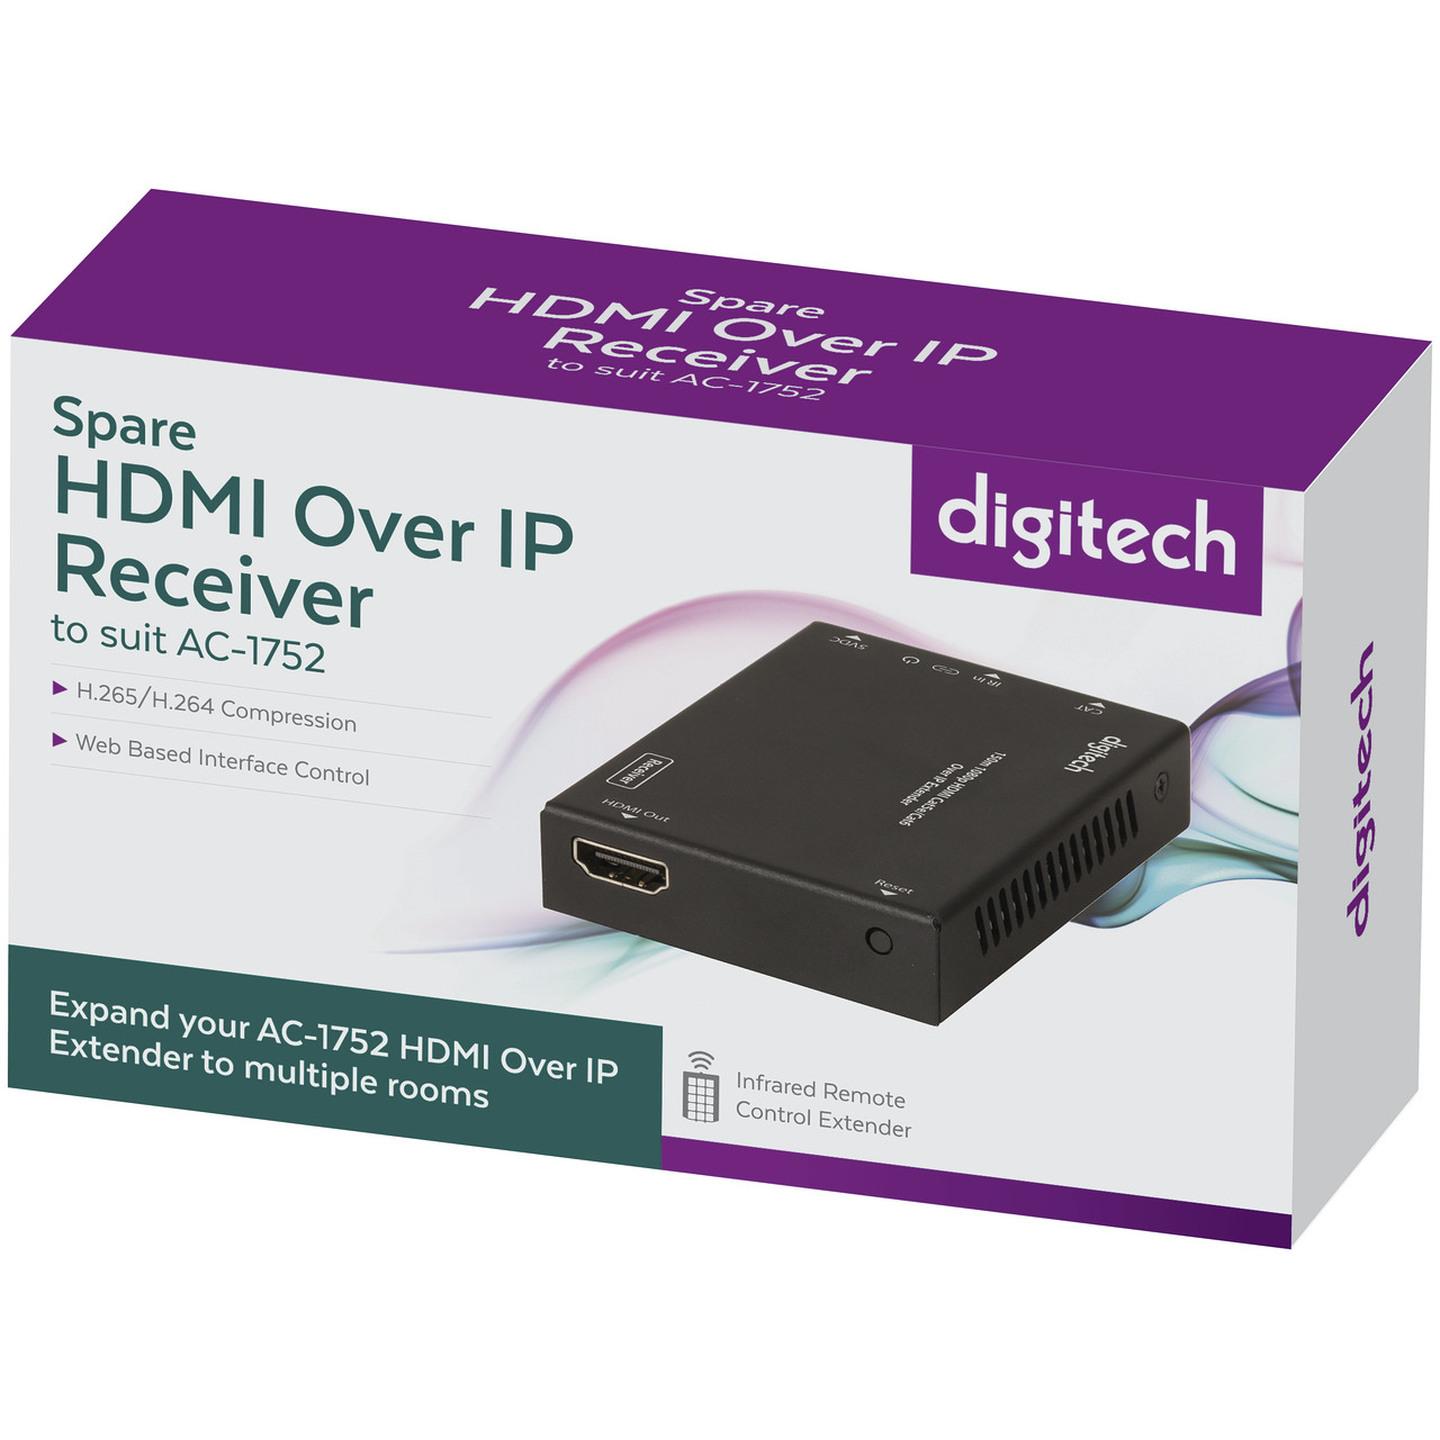 Digitech Spare HDMI Over IP Receiver to suit AC1752